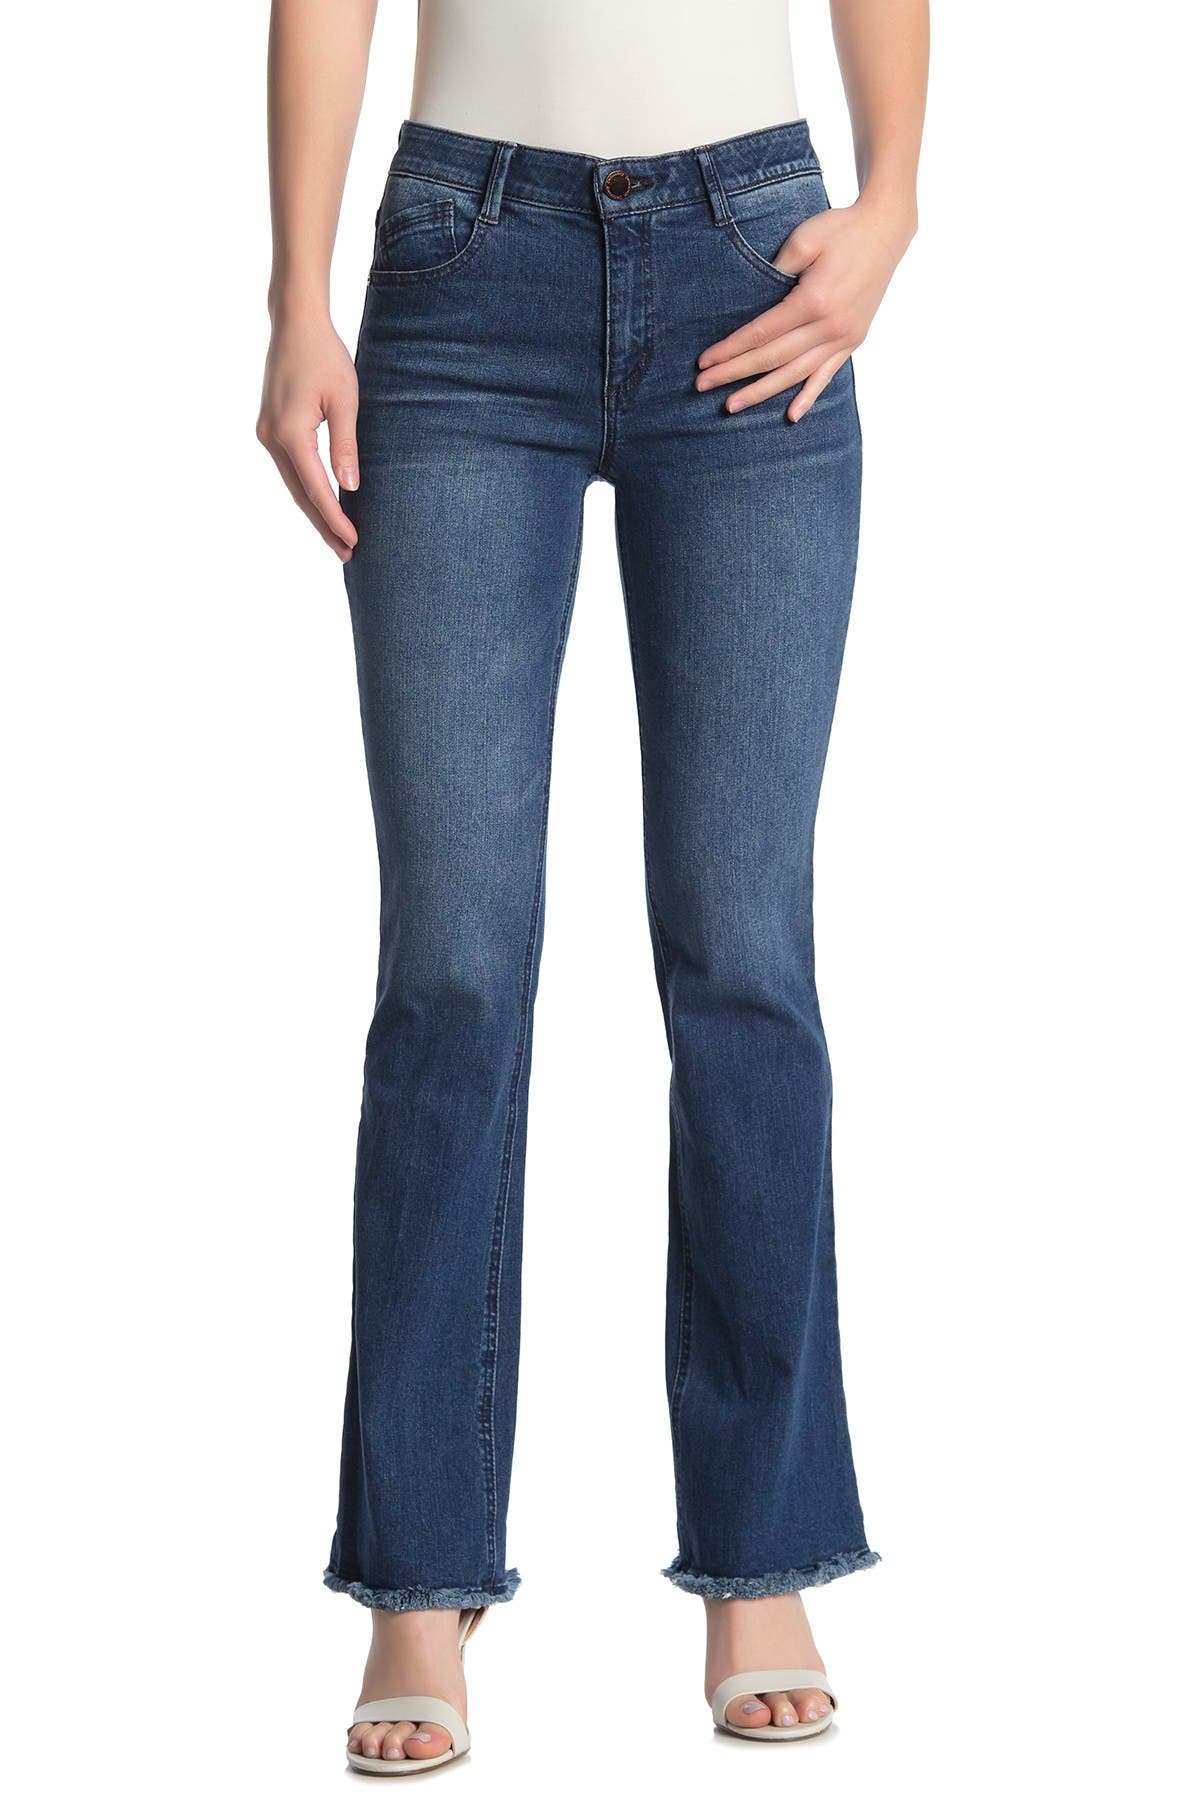 democracy jeans bootcut